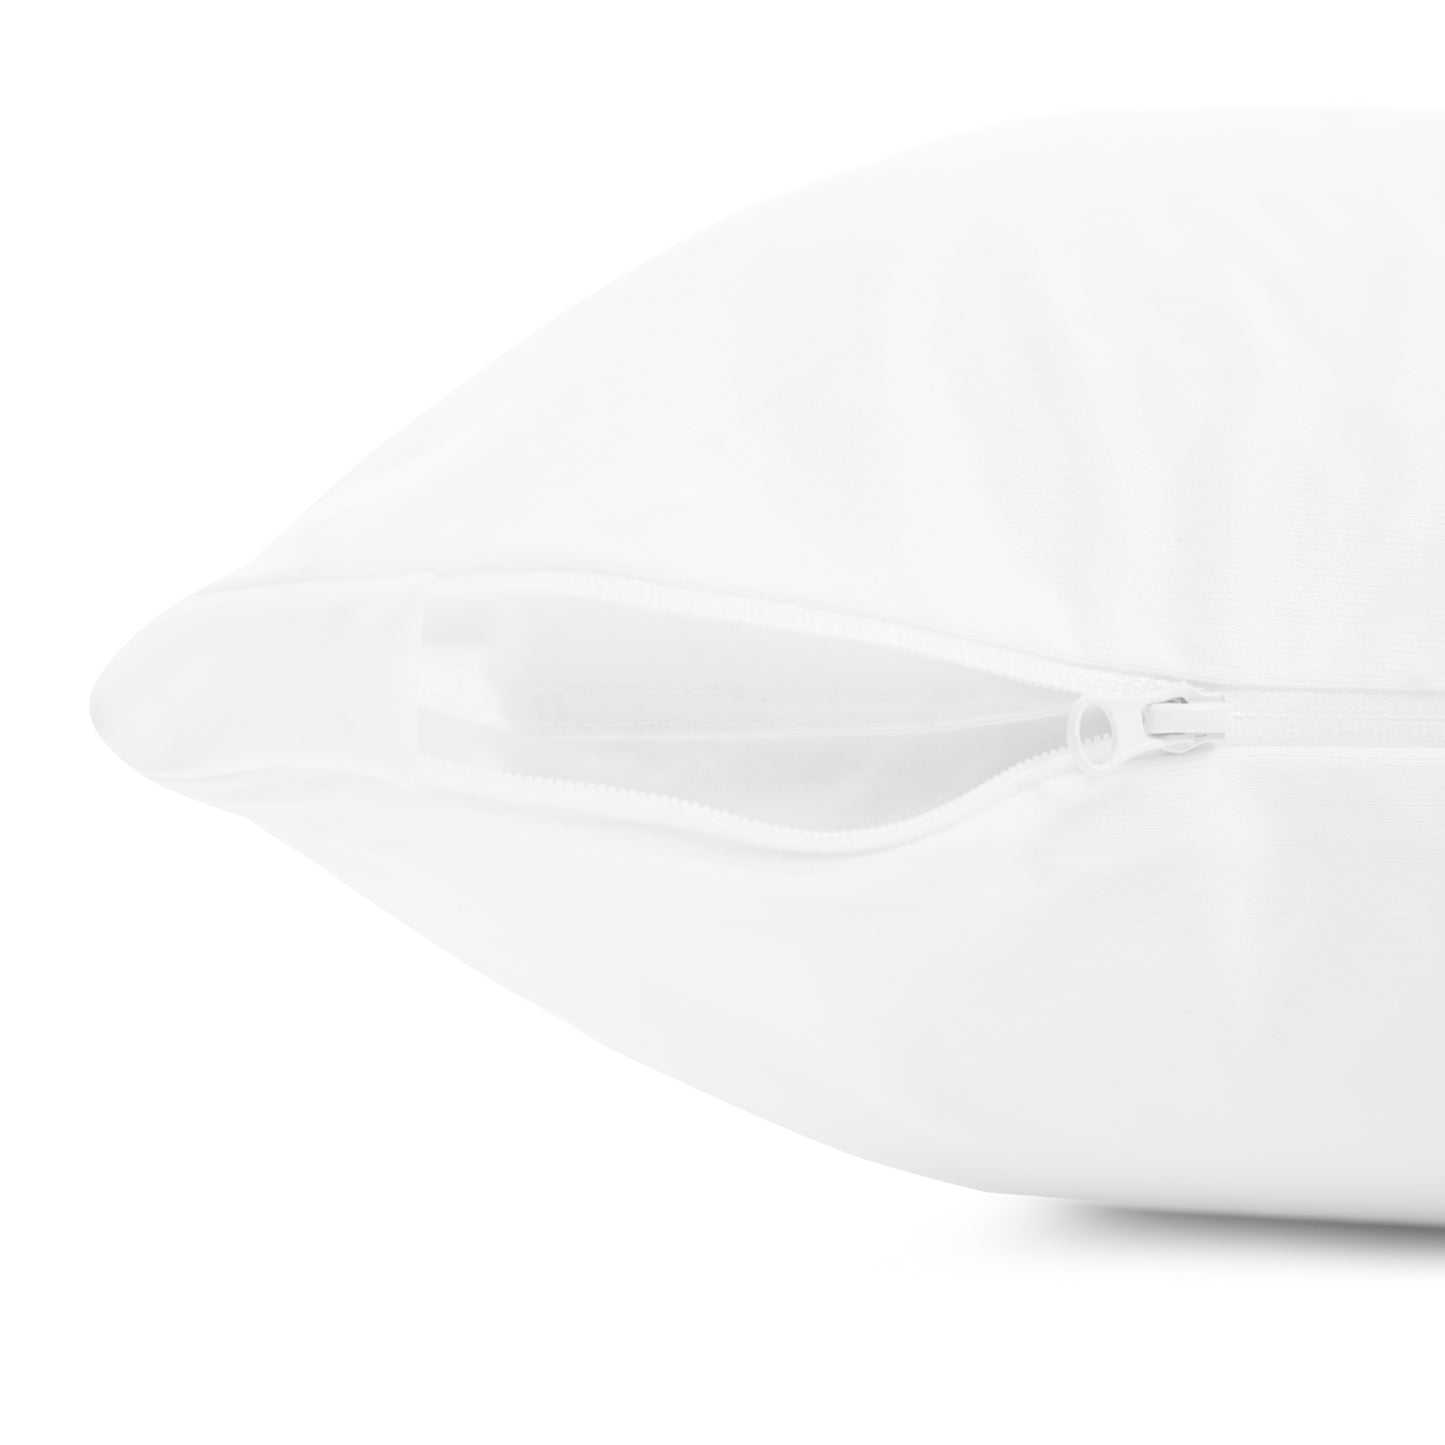 Sleep Tite 5-Sided Mattress Protector with Omniphase and Tencel